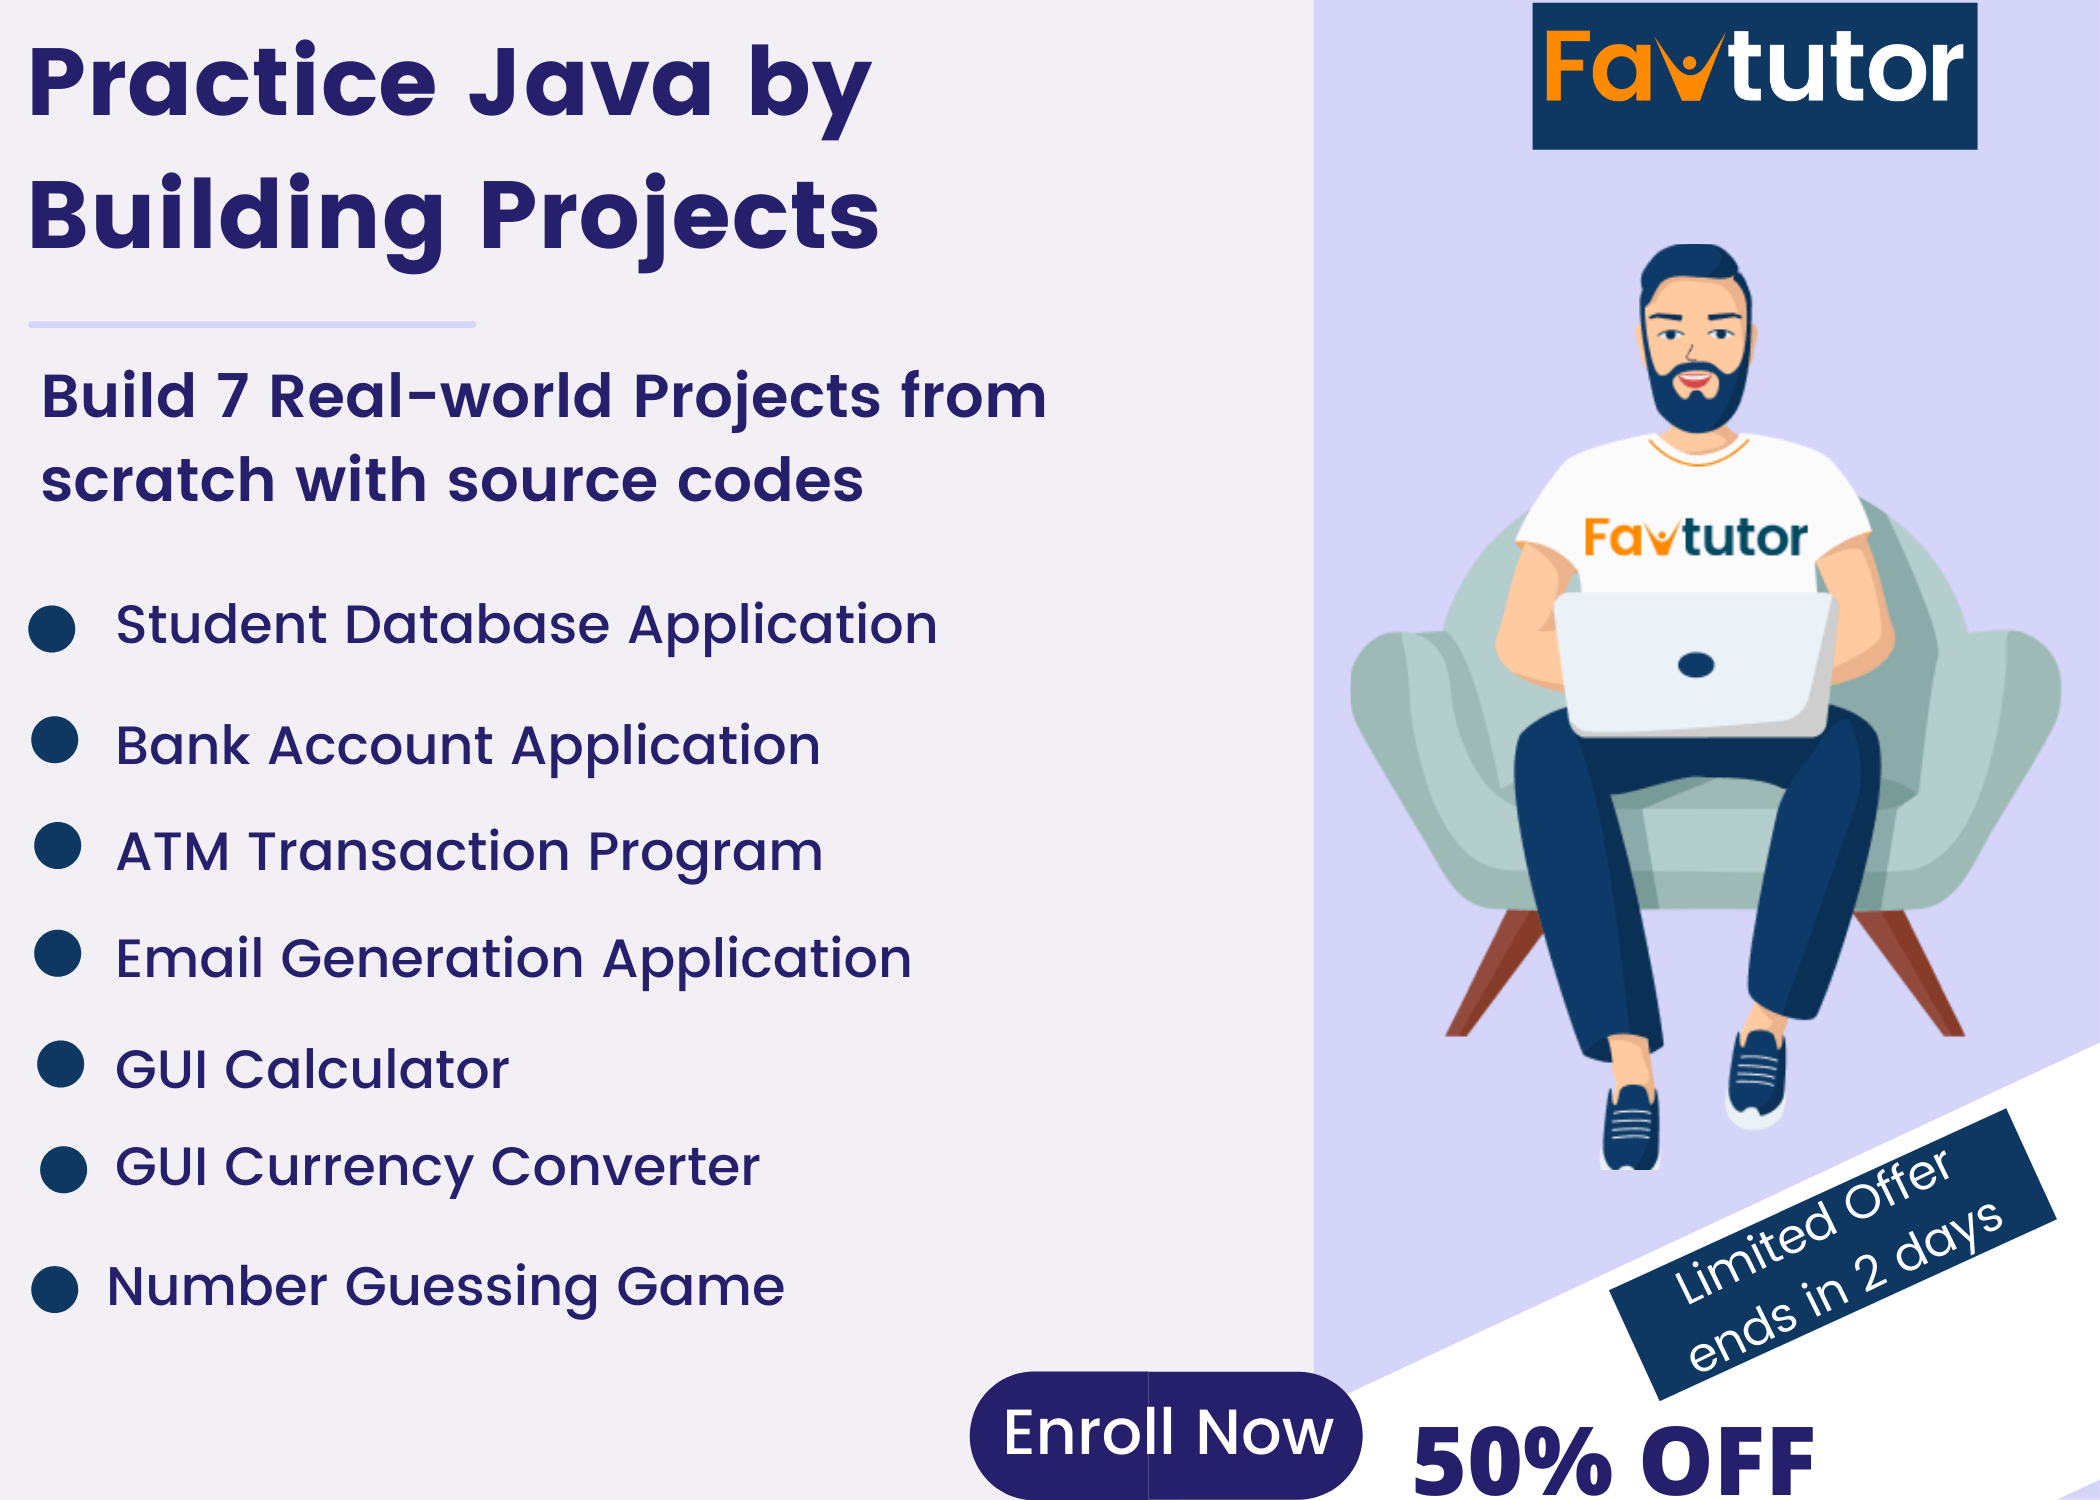 18 Amazing Java Projects for Beginners in 18 Updated   FavTutor